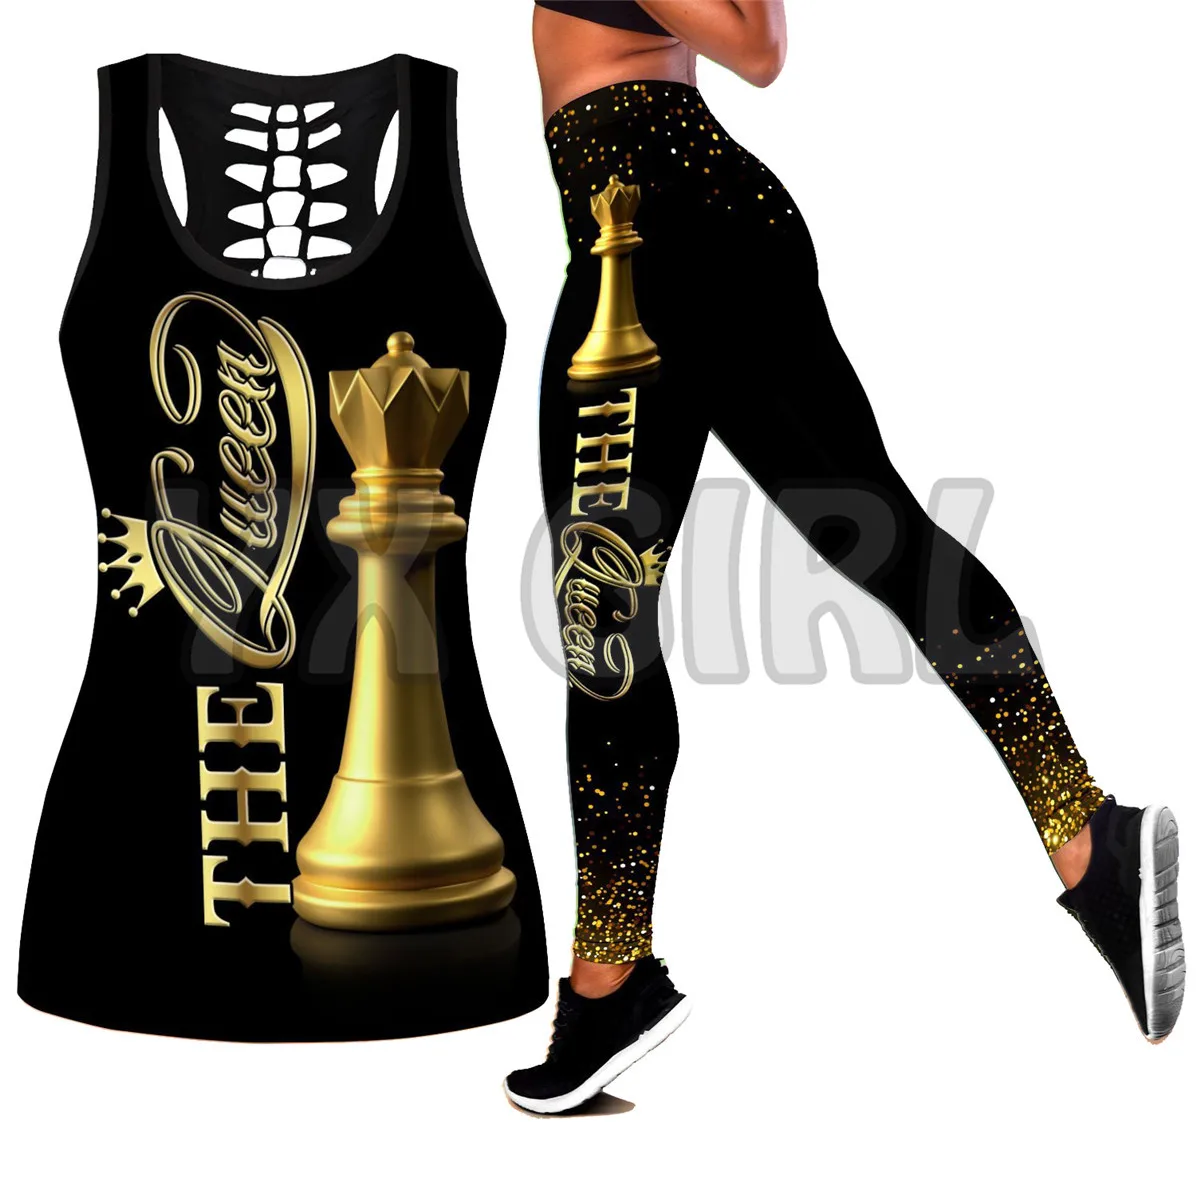 Chess Lovers - Queen 3D Printed Tank Top+Legging Combo Outfit Yoga Fitness Legging Women